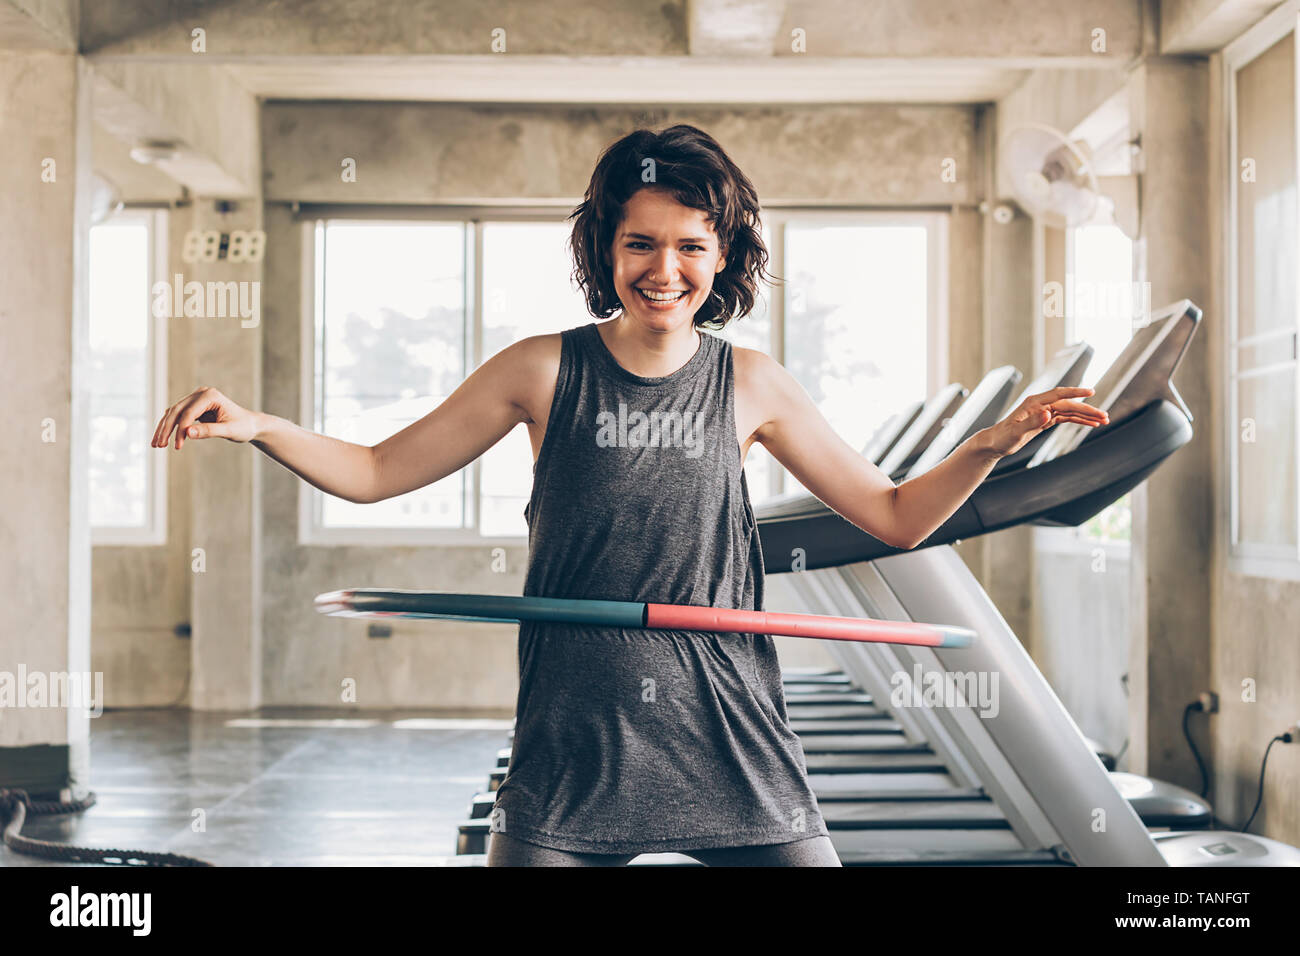 Beautiful young smiling happy Caucasian sporty woman with short hair playing hula hoop inside gym studio with treadmills behind - fun workout fitness Stock Photo